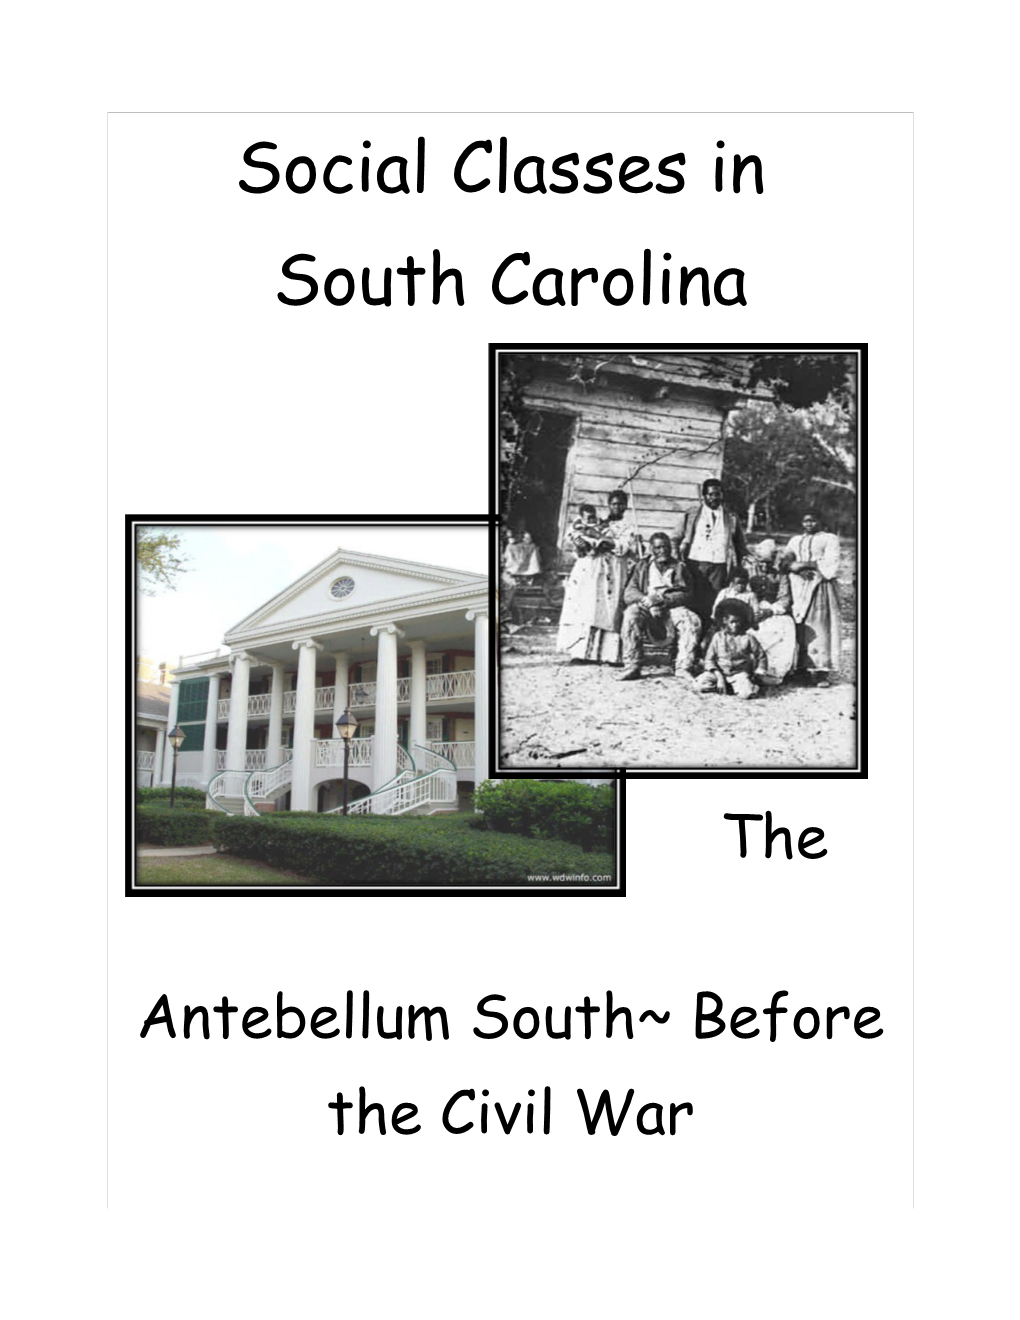 The Antebellum South Before the Civil War